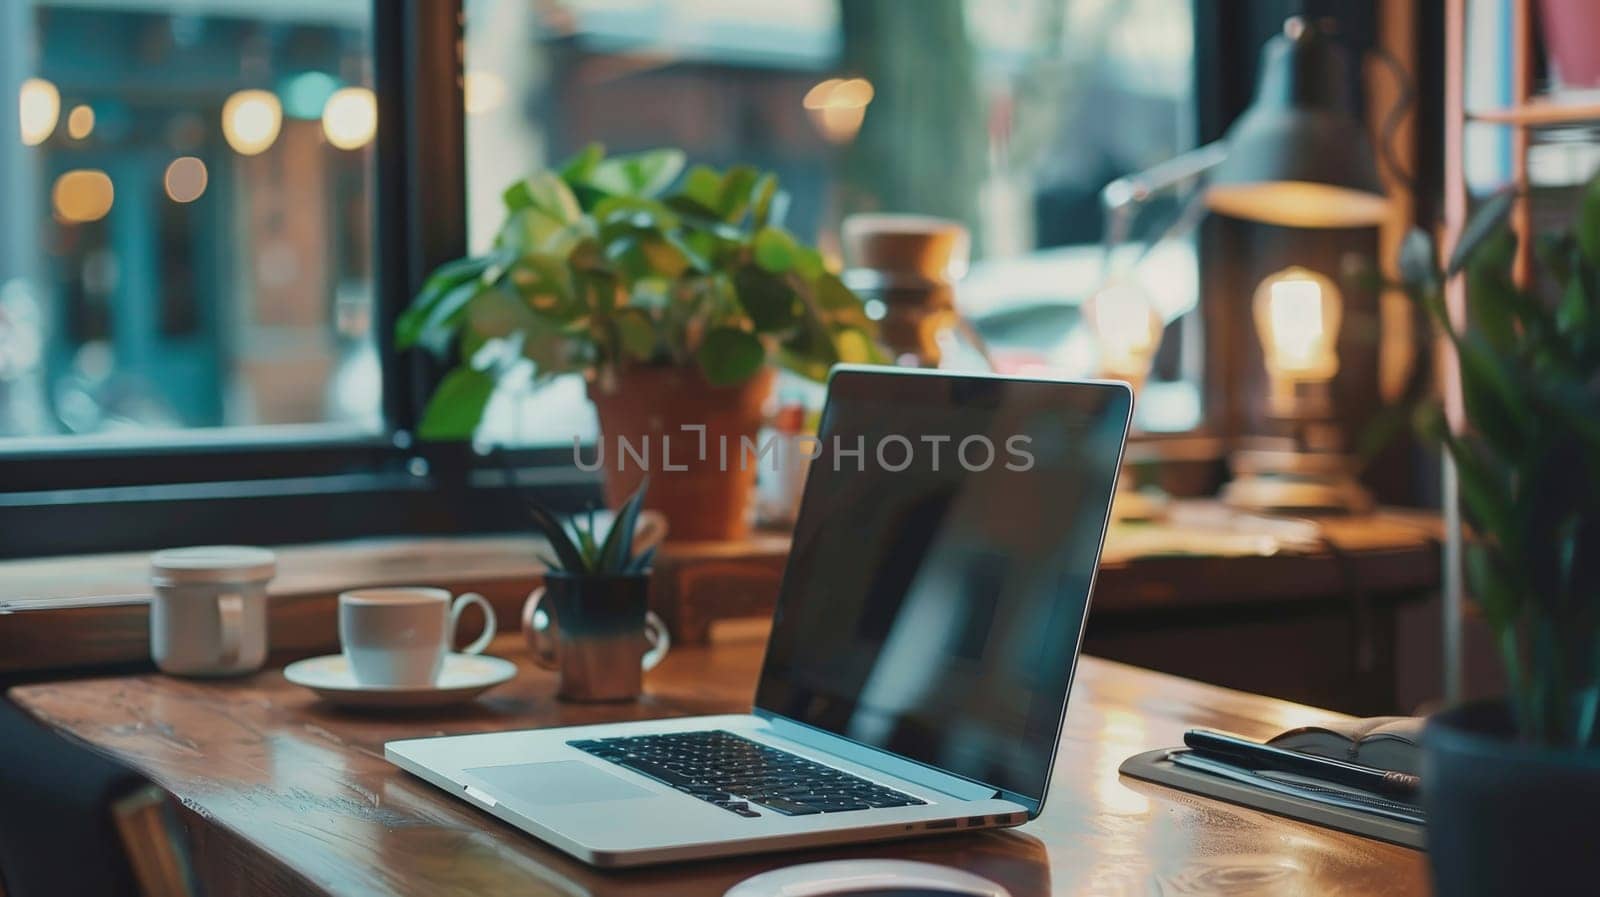 A laptop is open on a wooden desk with a potted plant next to it. The laptop is turned off, and the desk is cluttered with a cup, a keyboard, and a mouse. The scene suggests a relaxed